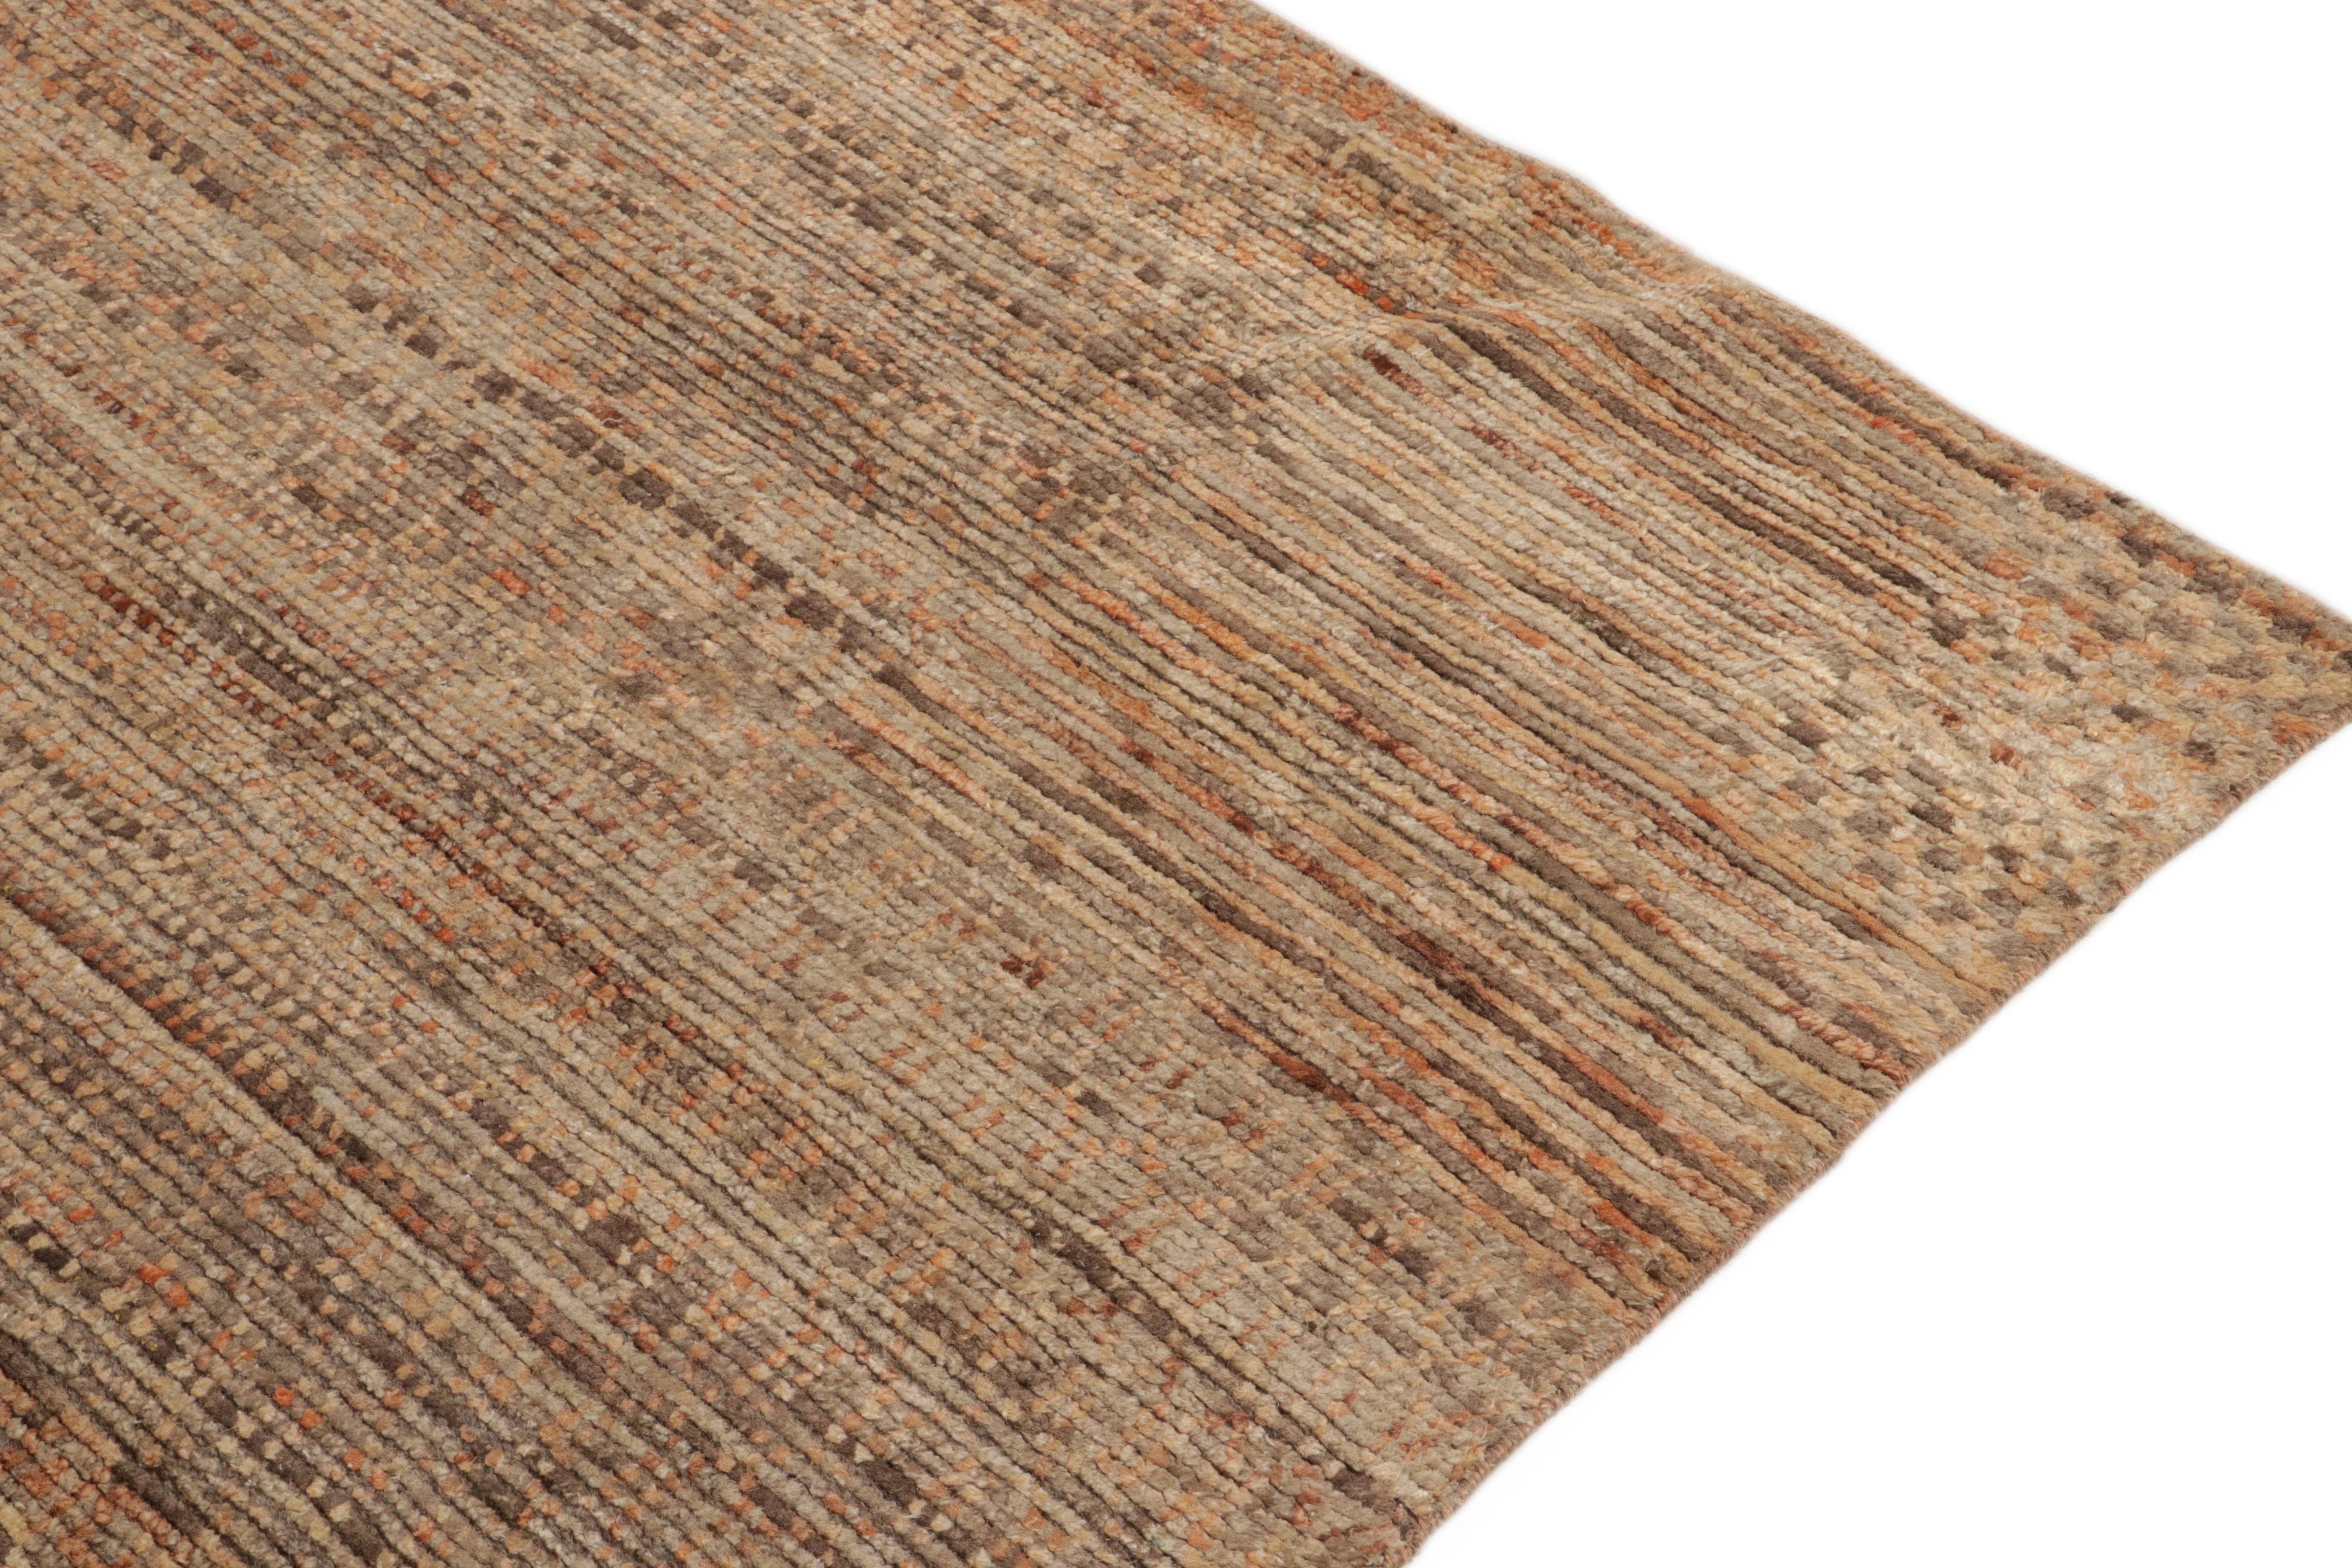 Contemporary Rug & Kilim’s Modern Textural Rug in Beige-Brown and Orange Striae Patterns For Sale